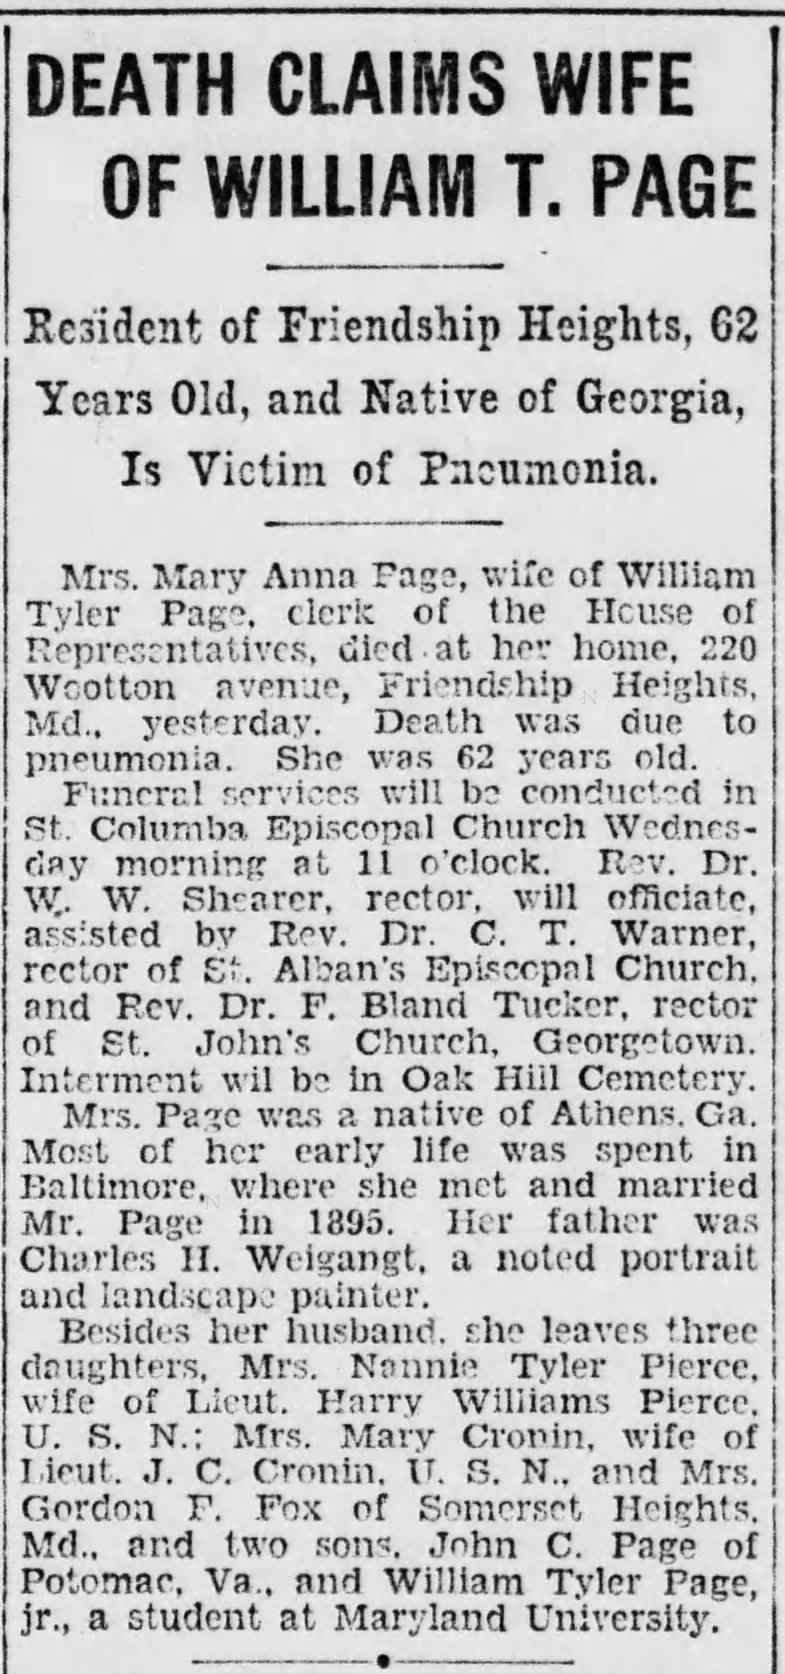 Death Claims Wife of William T. Page; 11 Mar 1929; Evening Star; 9